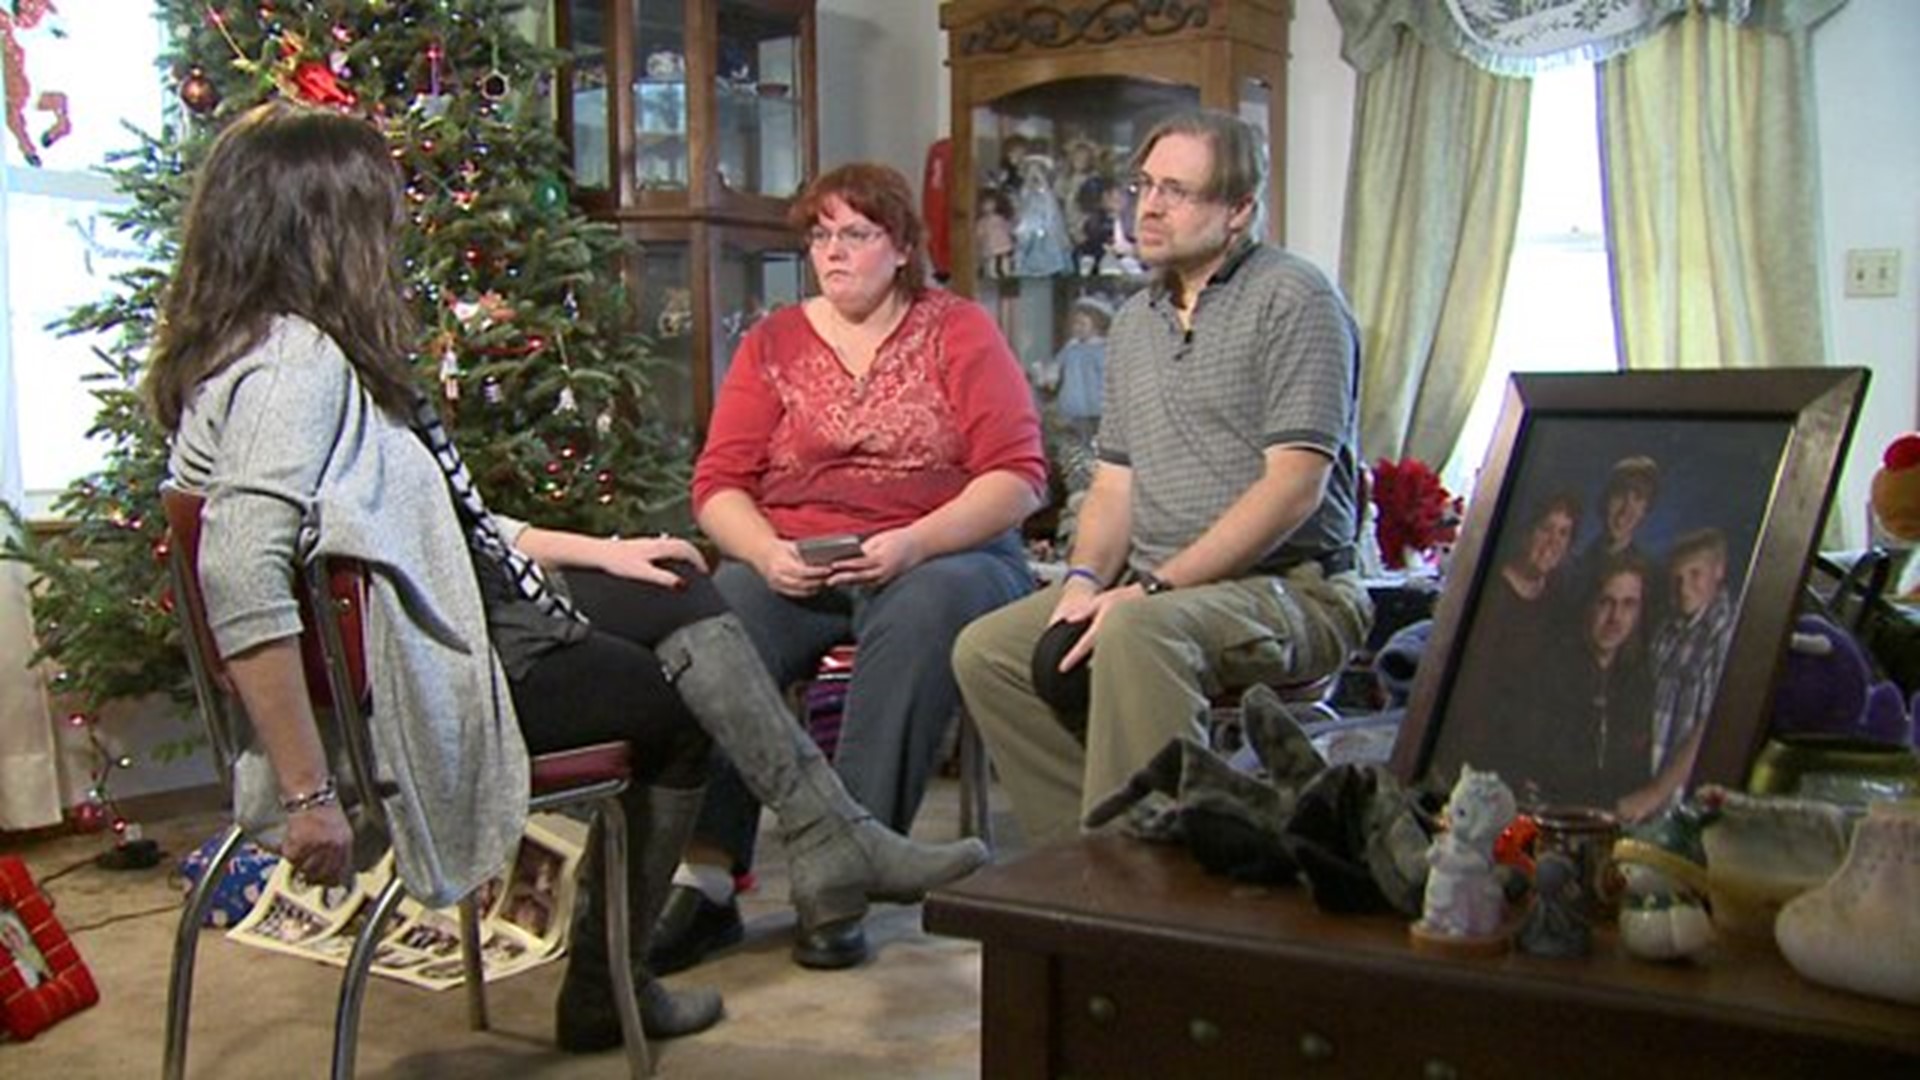 Moline family mourning loss of son this Christmas